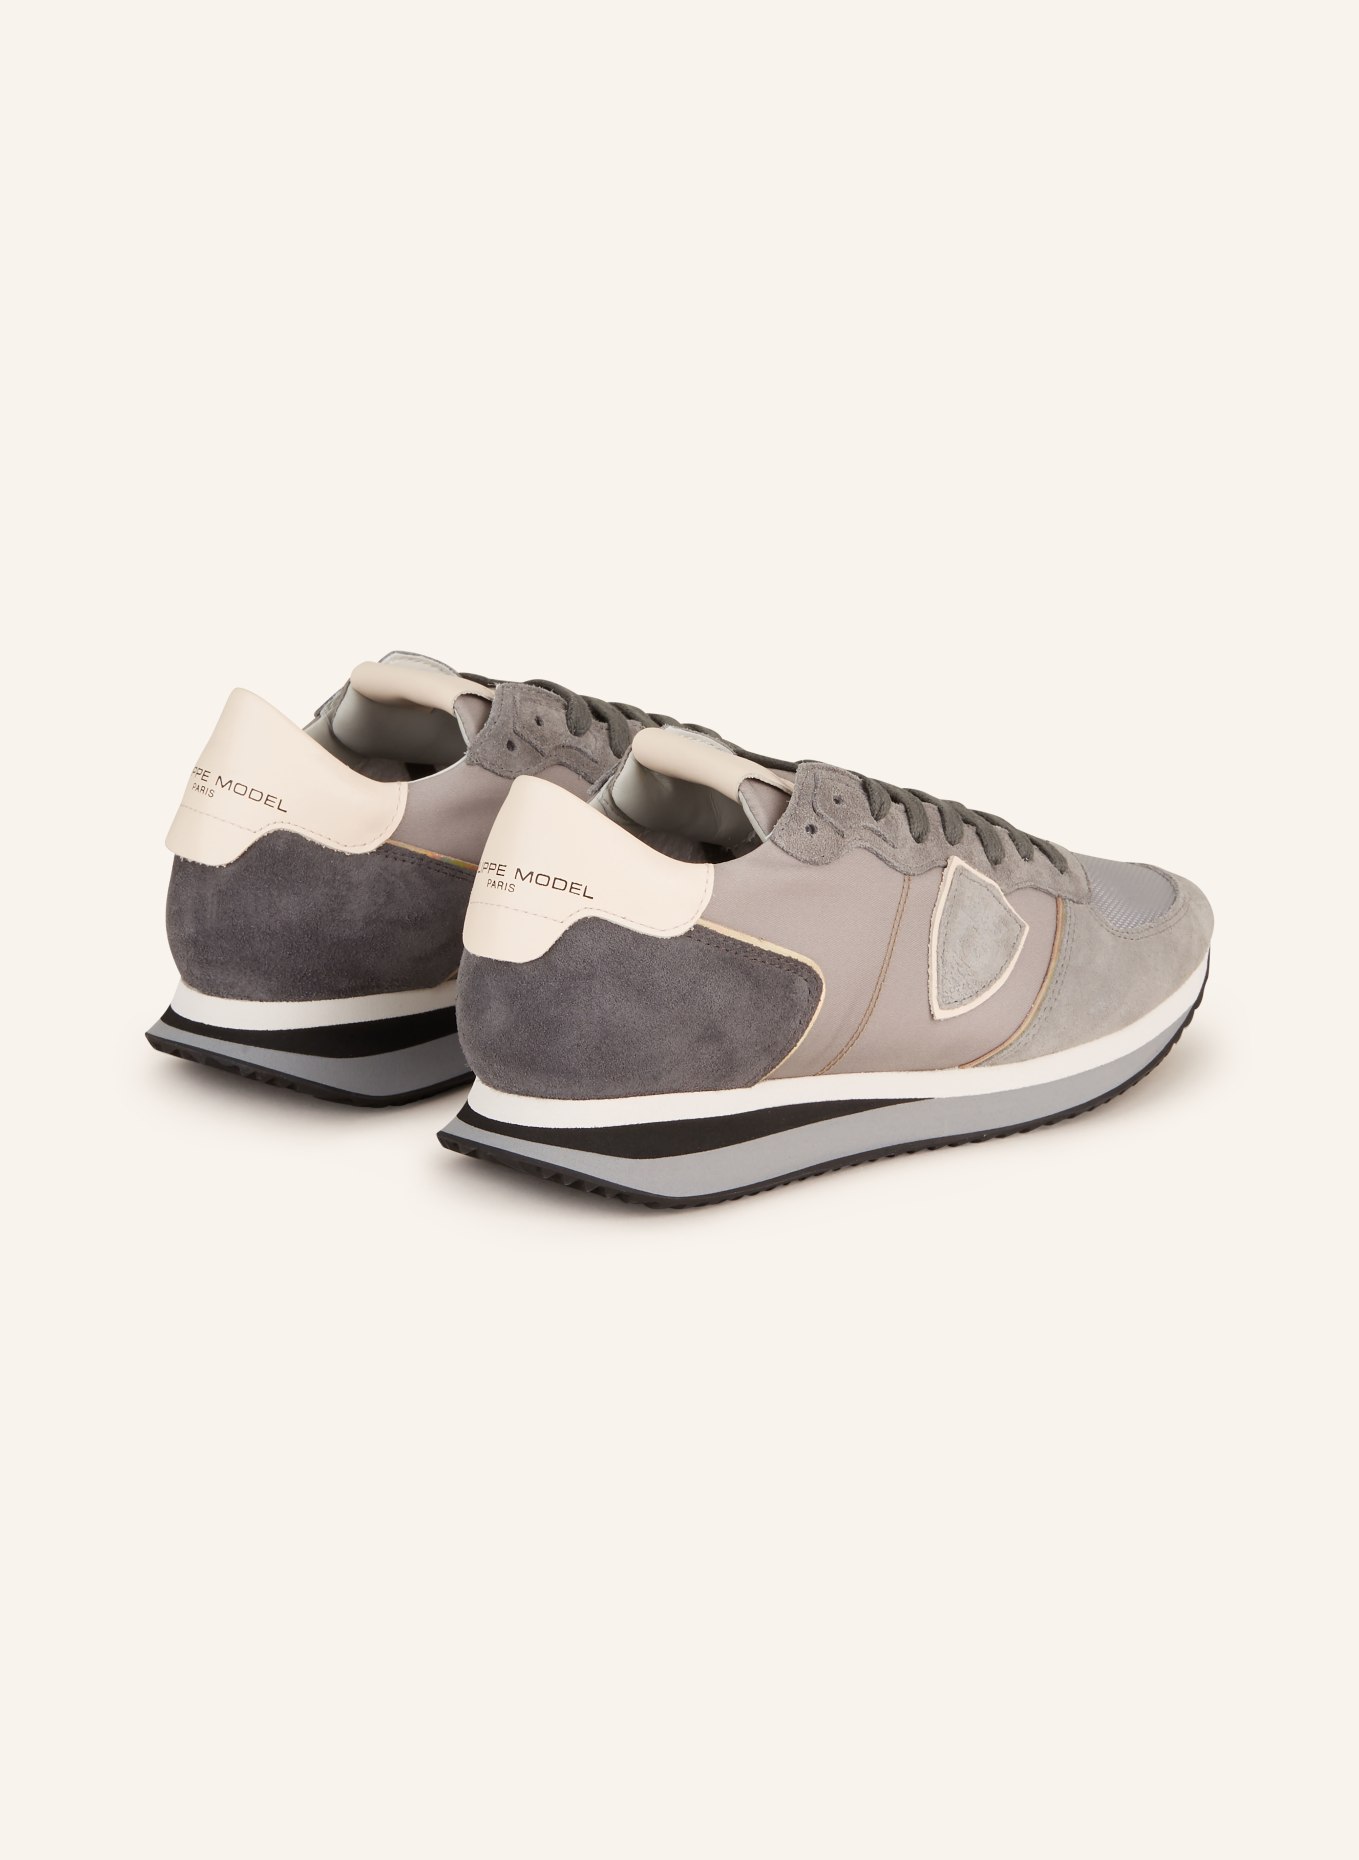 PHILIPPE MODEL Sneakers TRPX, Color: GRAY (Image 2)